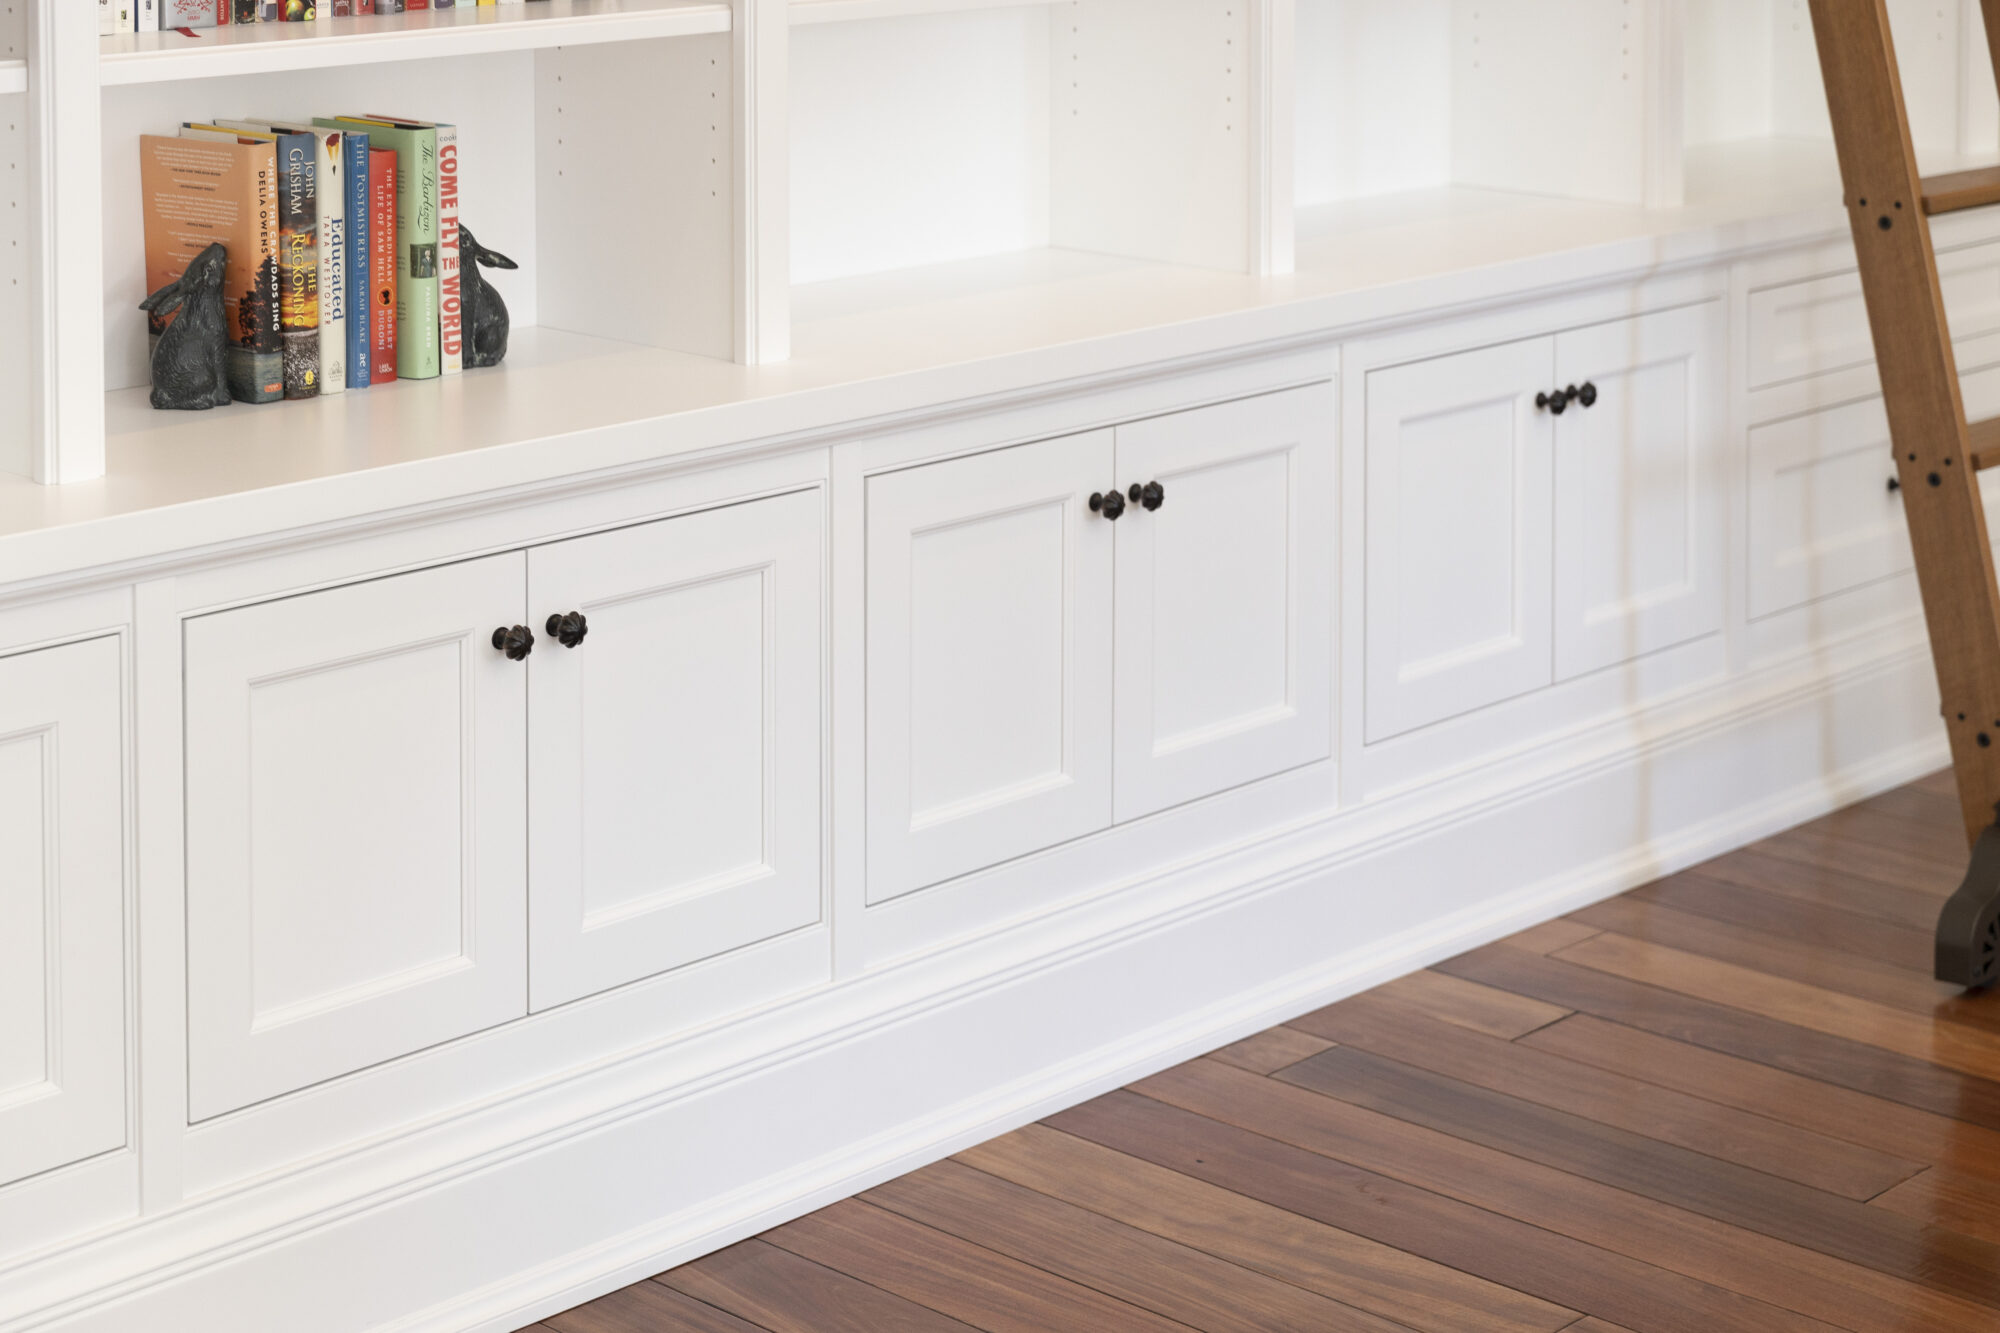 Custom-built white cabinetry forms an elegant bookcase wall in a renovated residential space, reflecting R.E. McNamara Inc.'s expertise in design and craftsmanship.